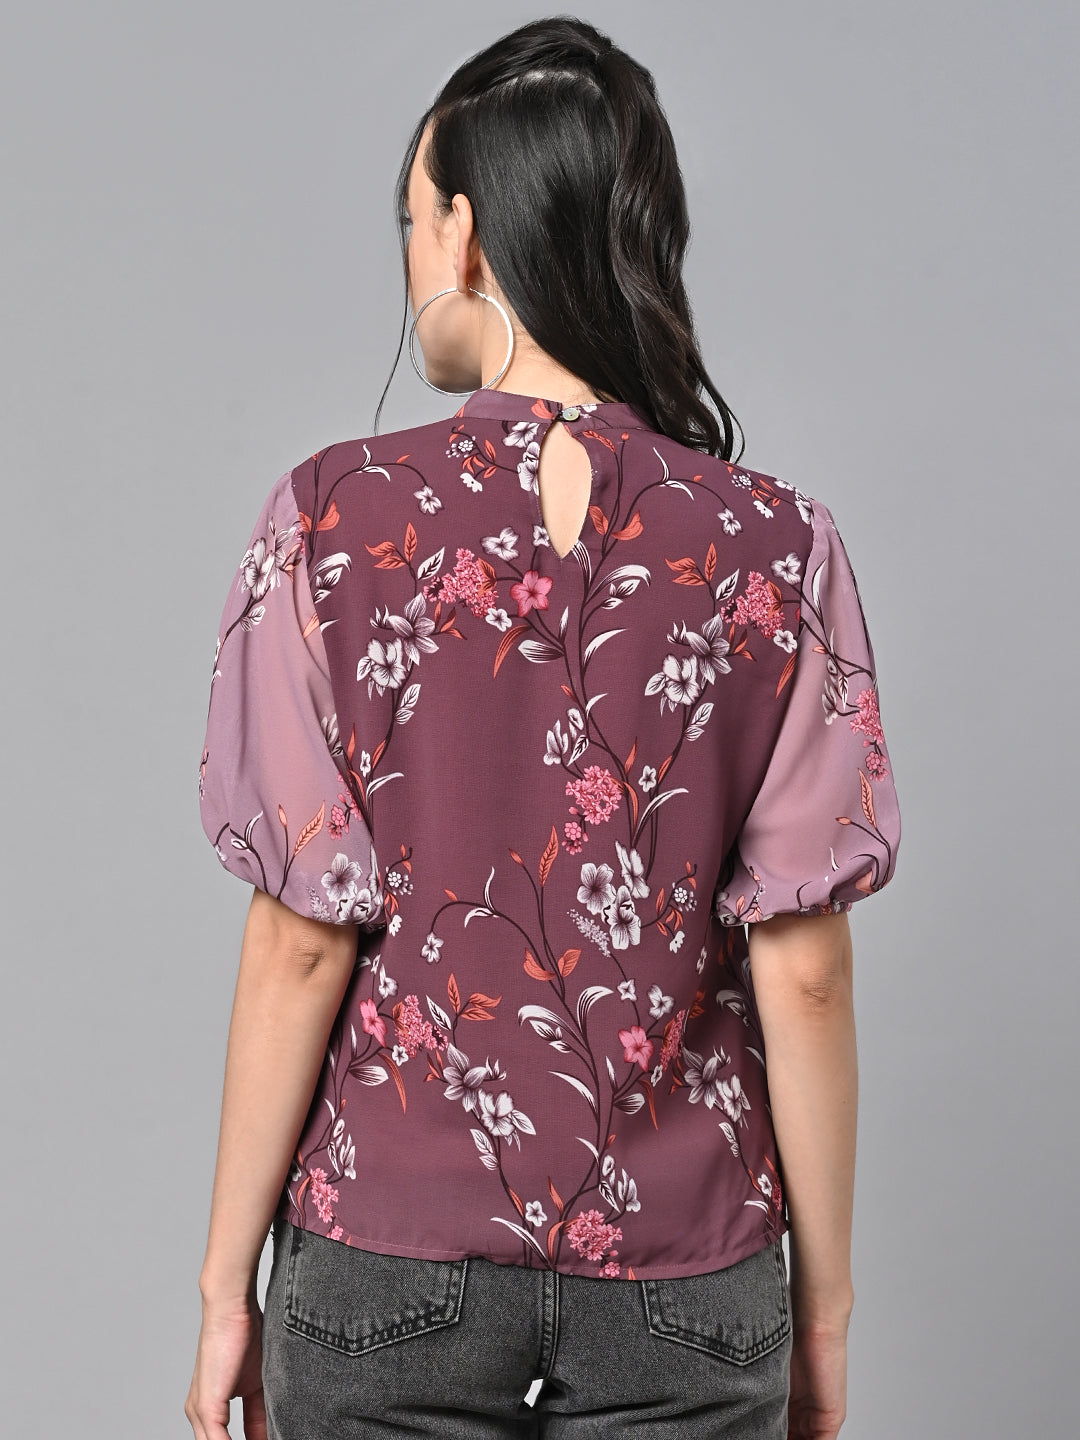 Valbone Women’s Multi Color Floral Print Top With Half-Sleeves